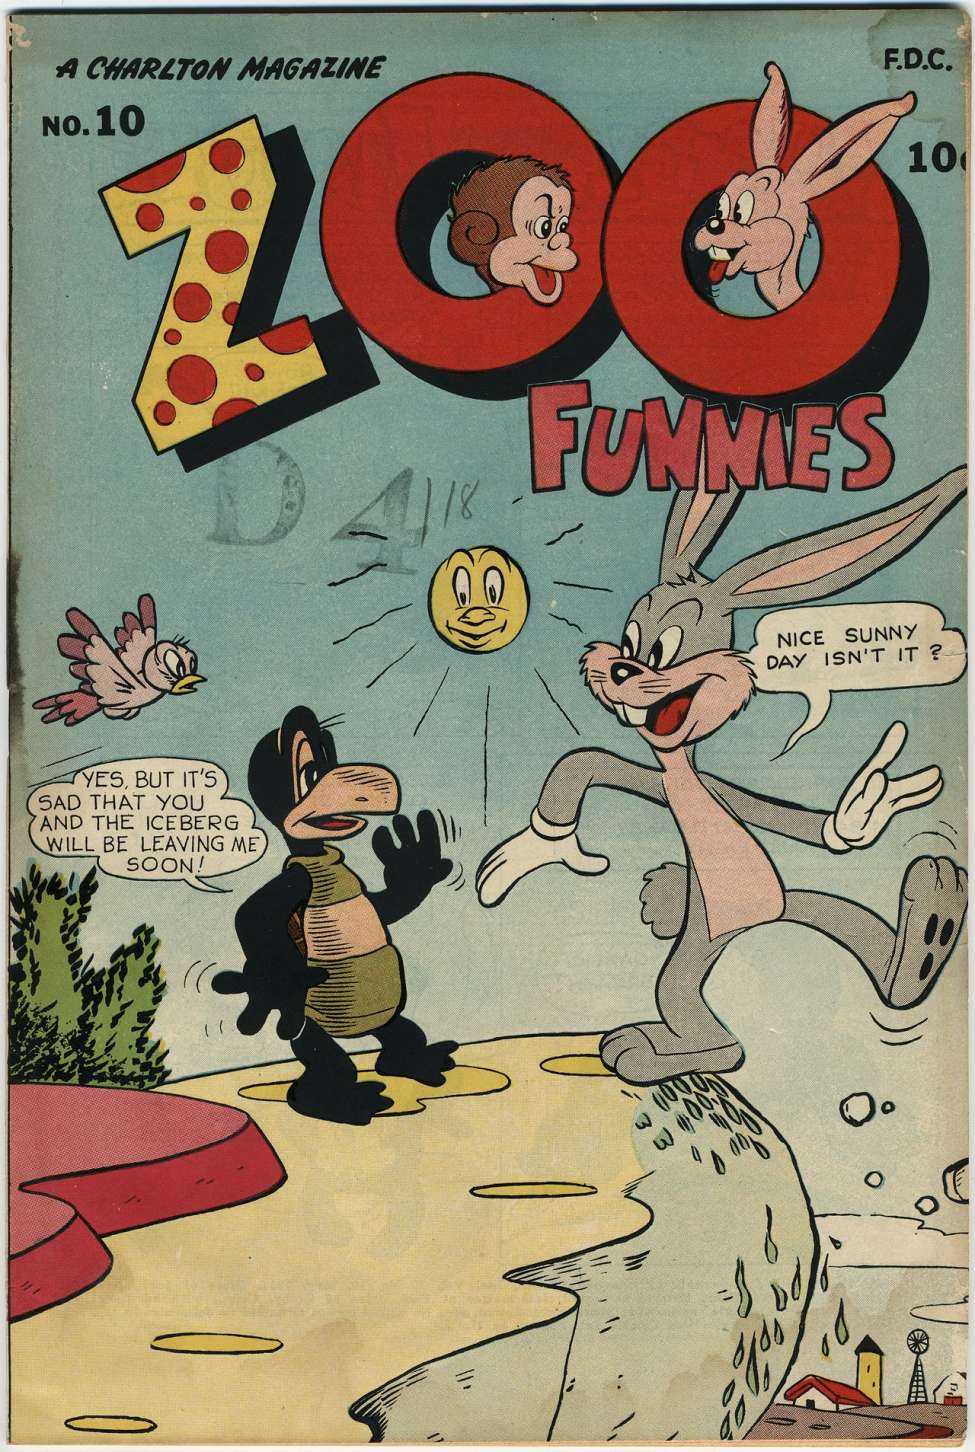 Book Cover For Zoo Funnies v1 10